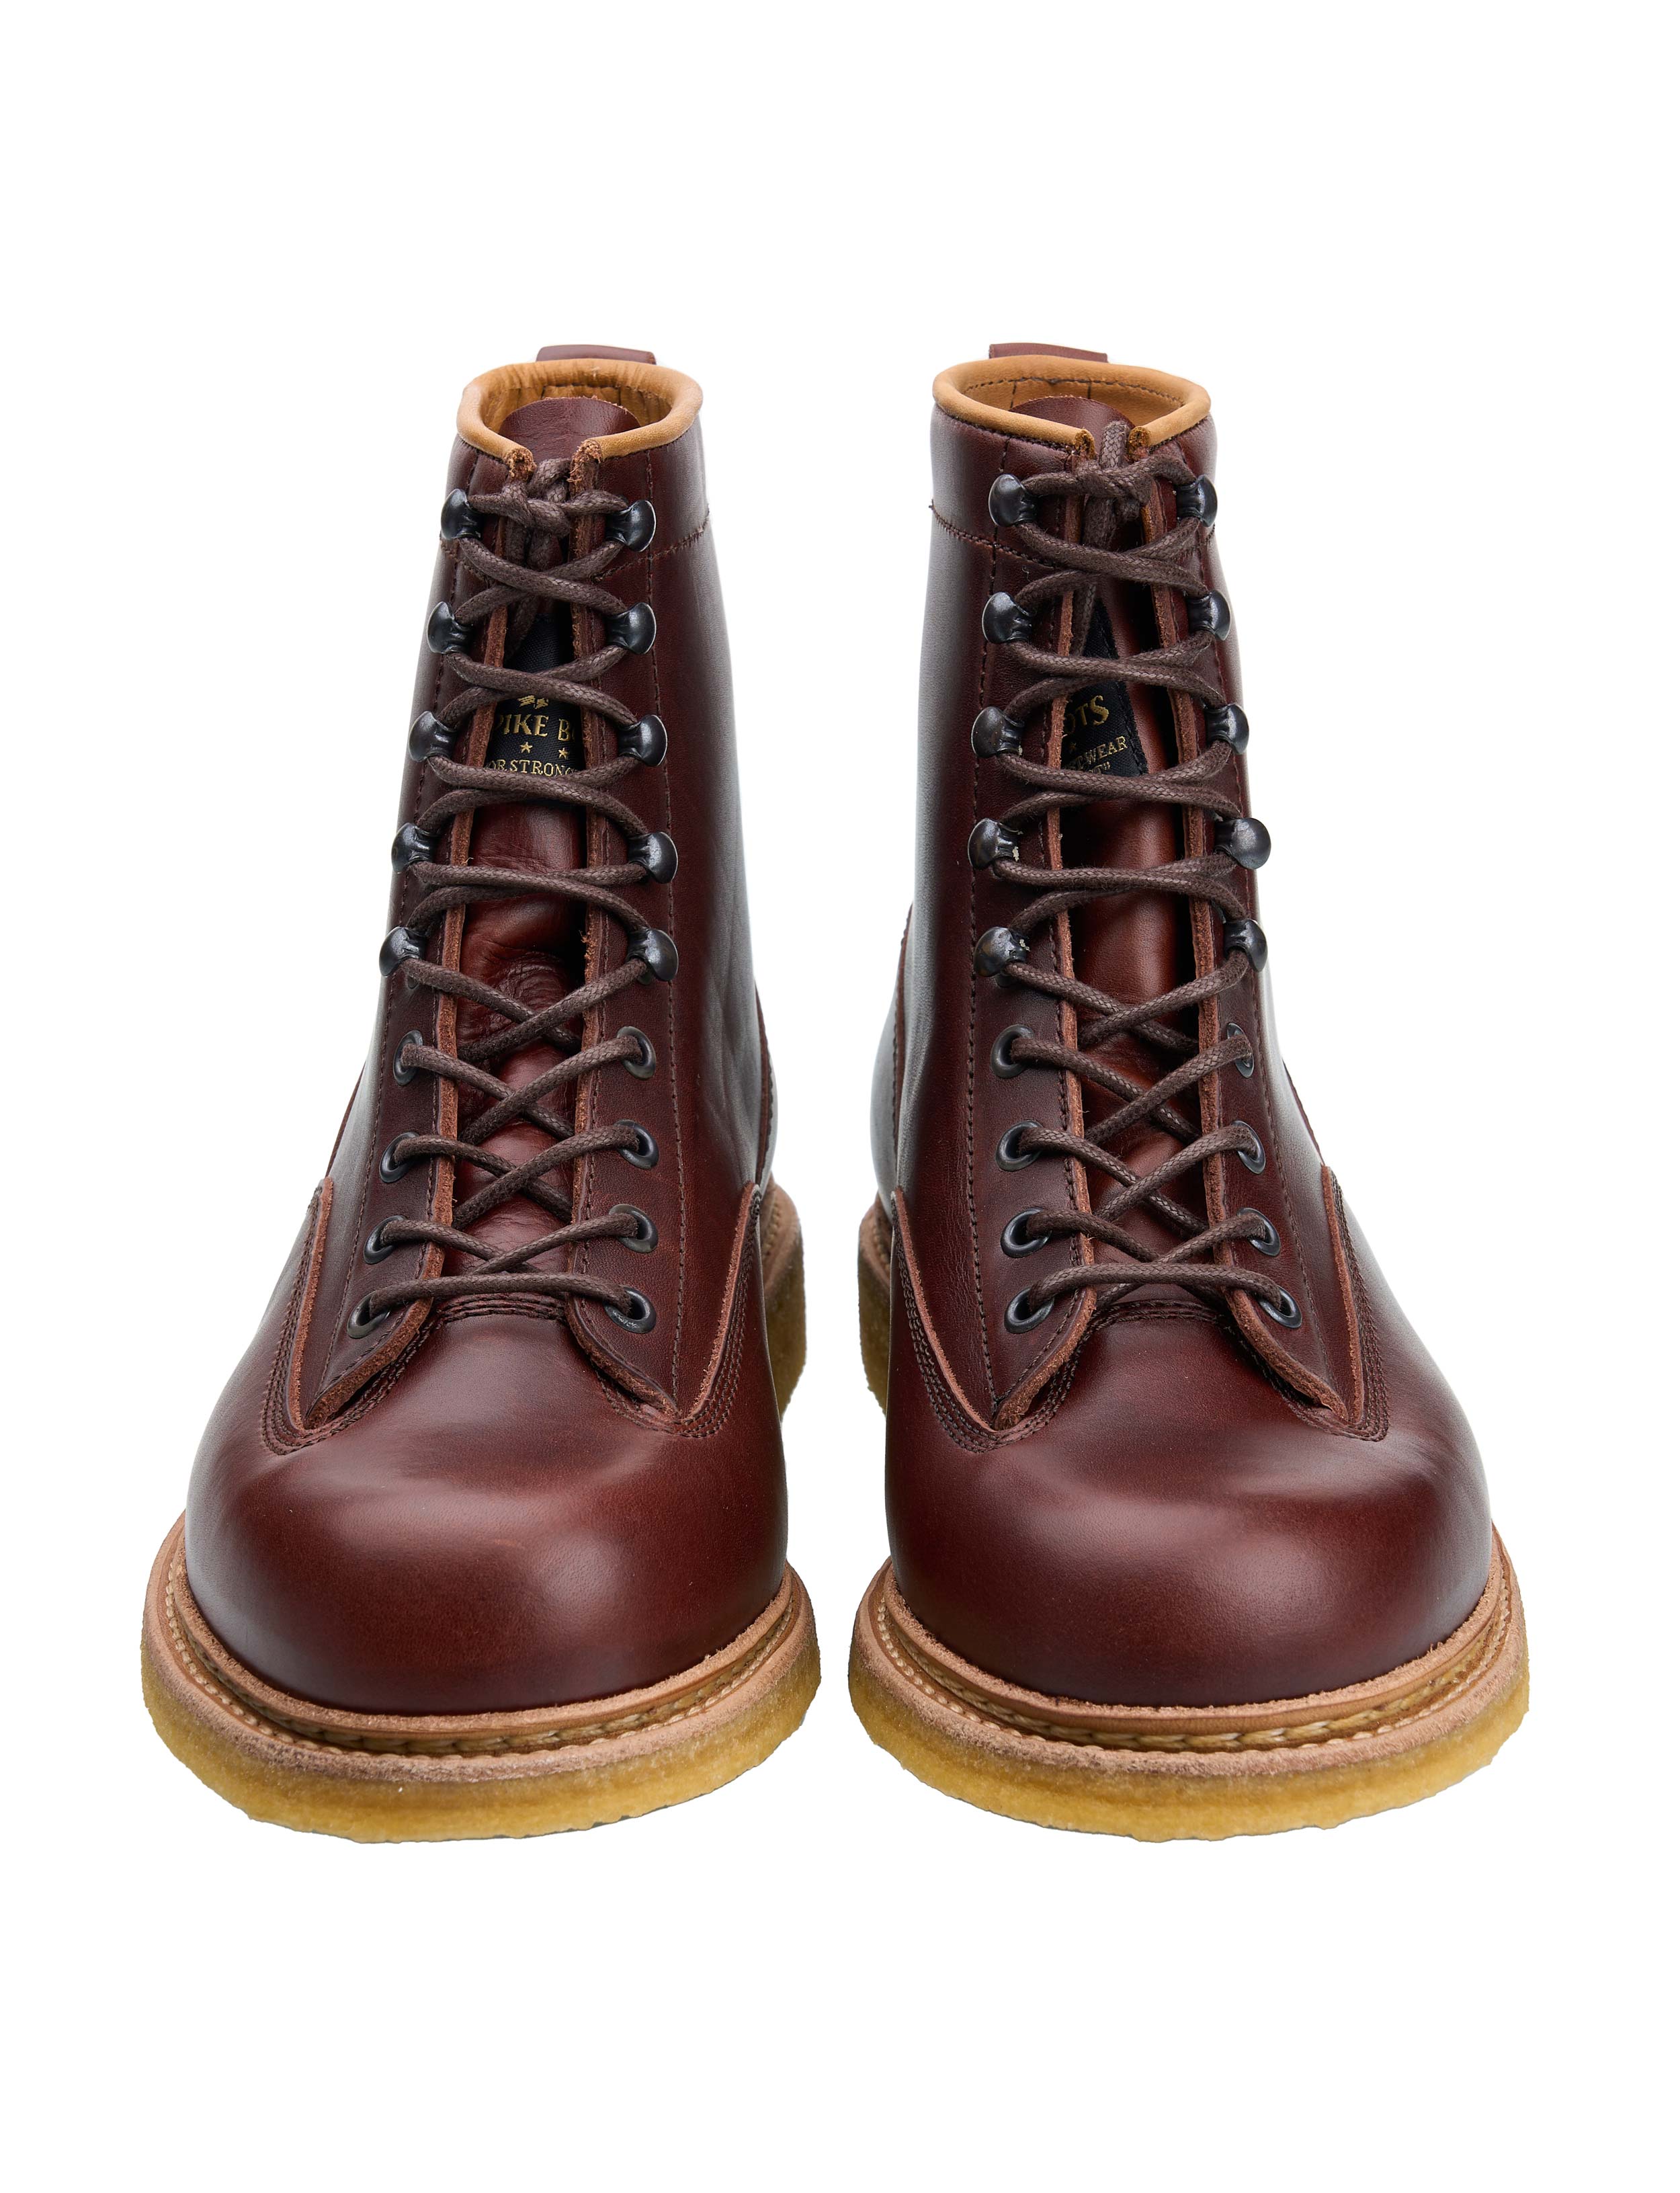 1947 Trapper Boots brown